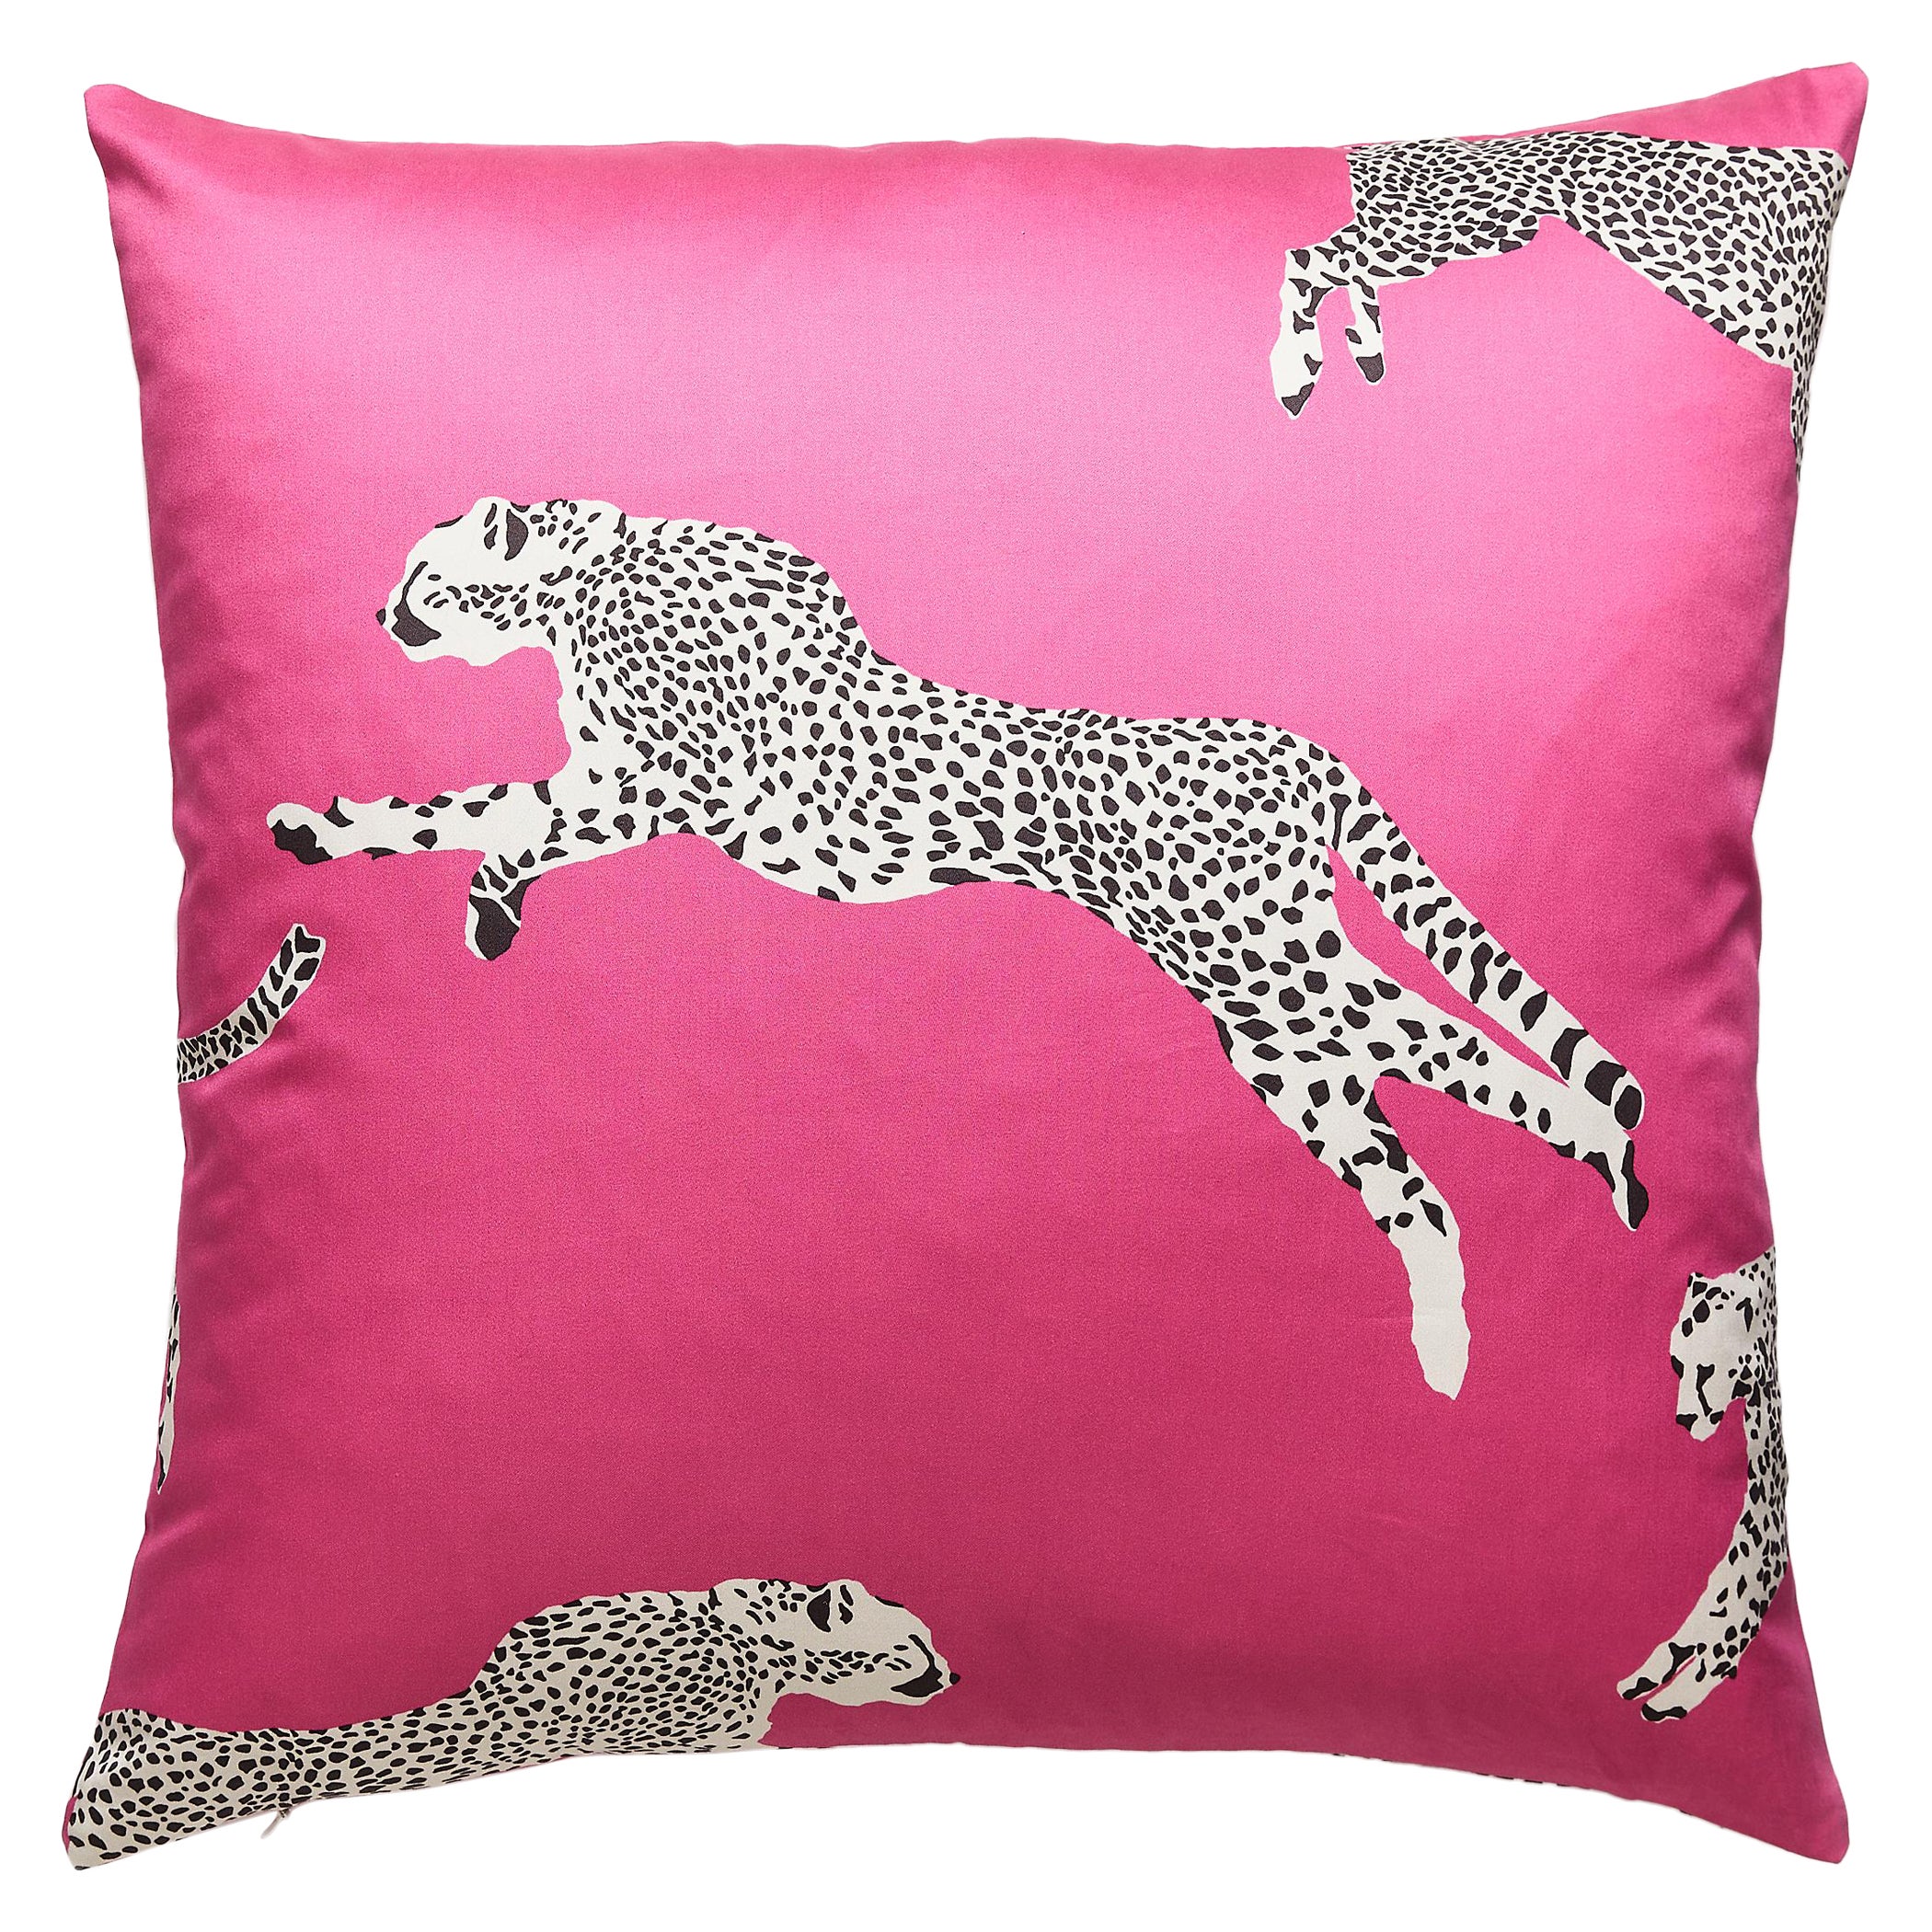 Leaping Cheetah Pillow For Sale